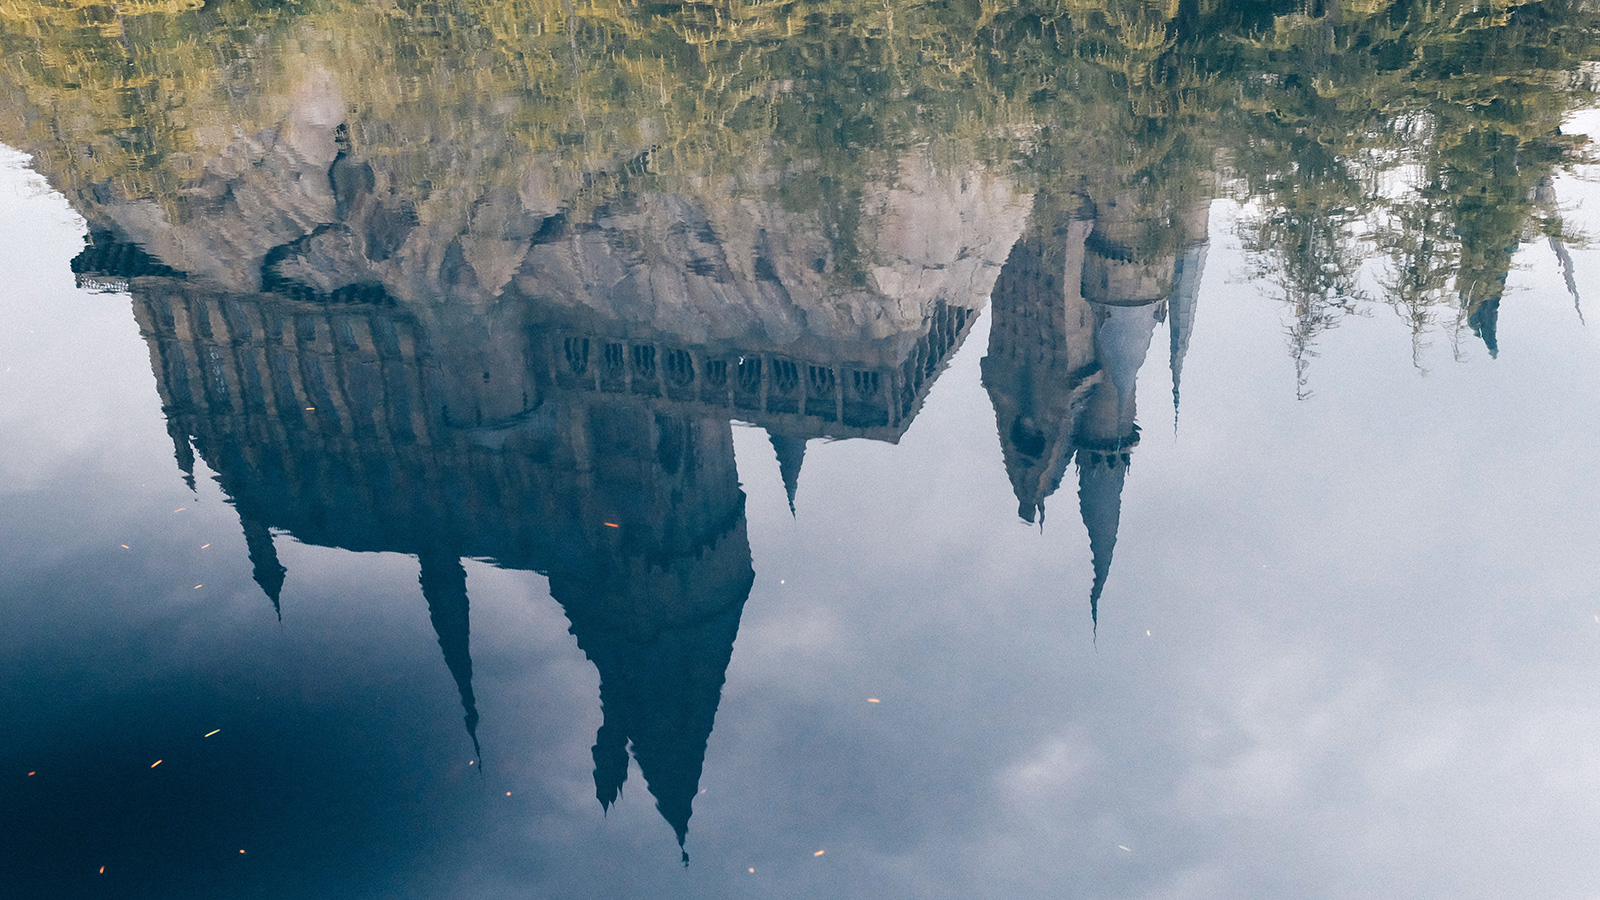 A reflection of Hogwarts Castle in a body of water.